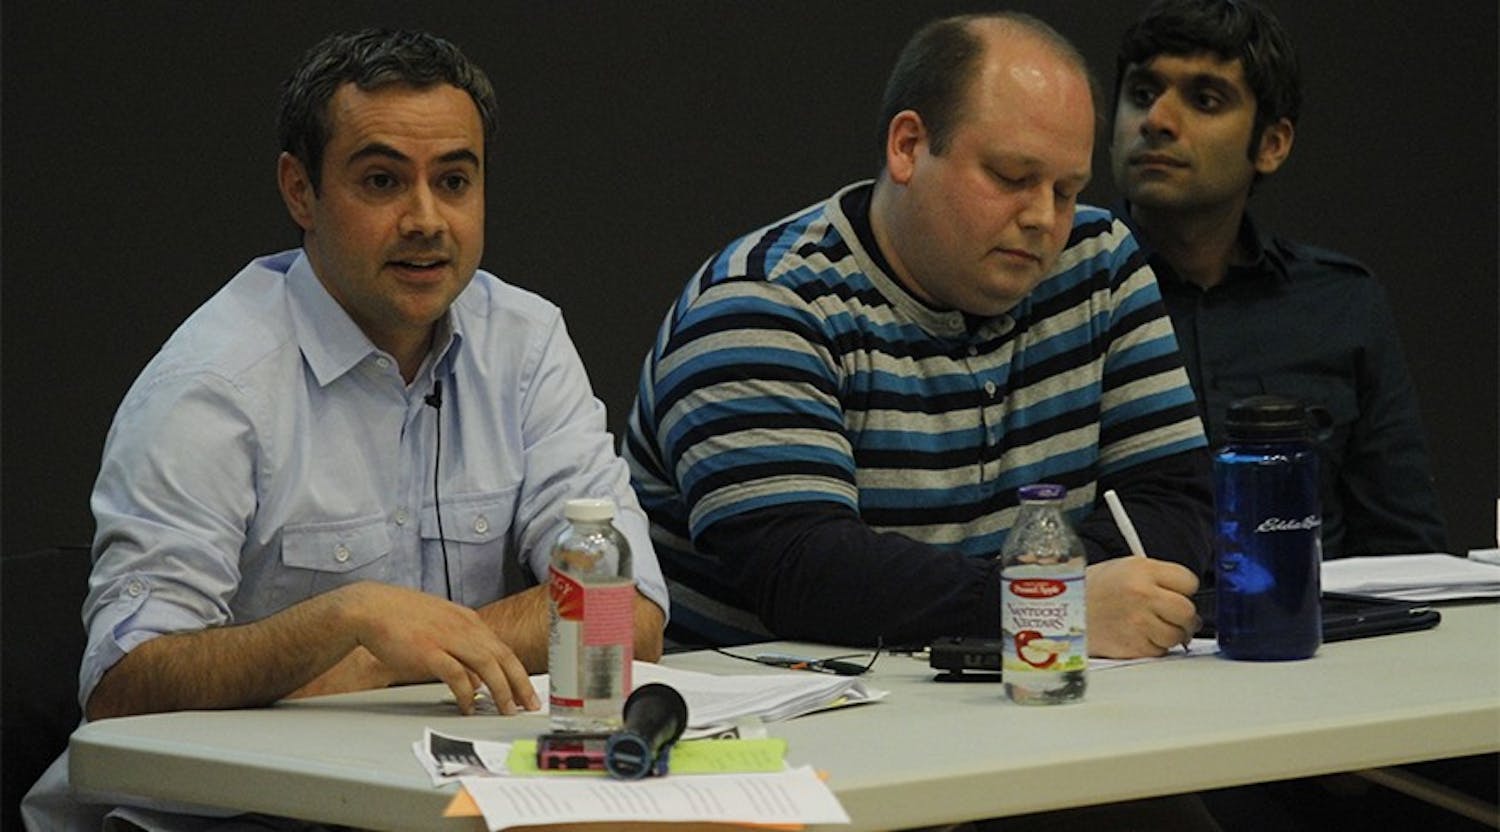 Yousuf Al-Bulushi, left, Nathan Swanson, middle, and Neel Ahuja participate in a forum.